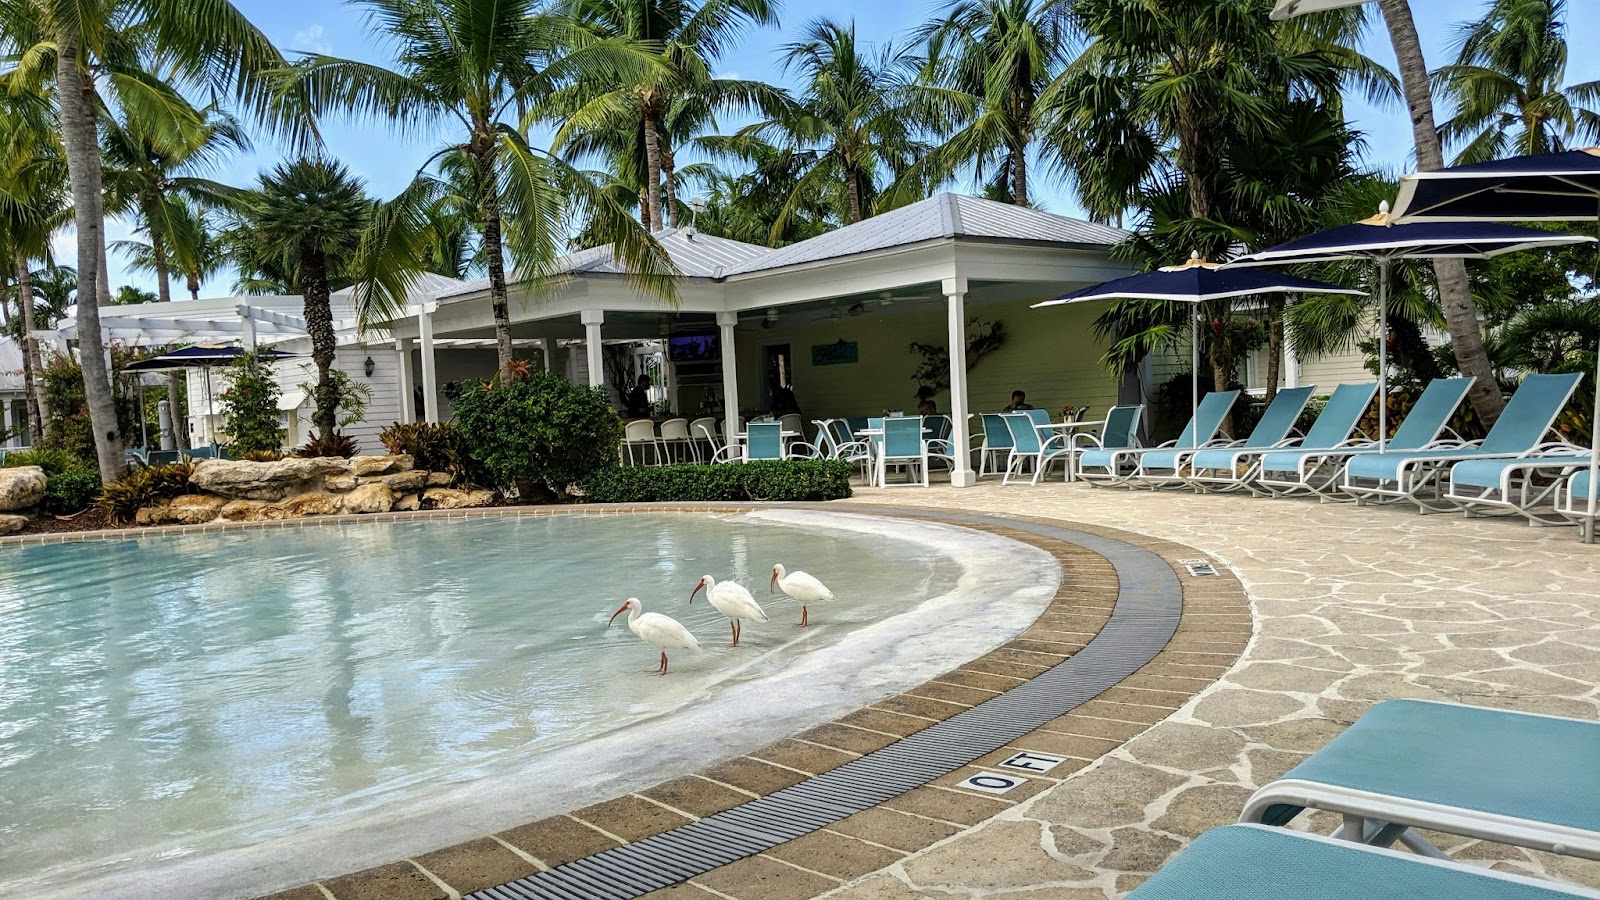 These luxury resorts are some of the best reasons for travelers to visit the Florida Keys.
pictured: a resort in the Florida Keys